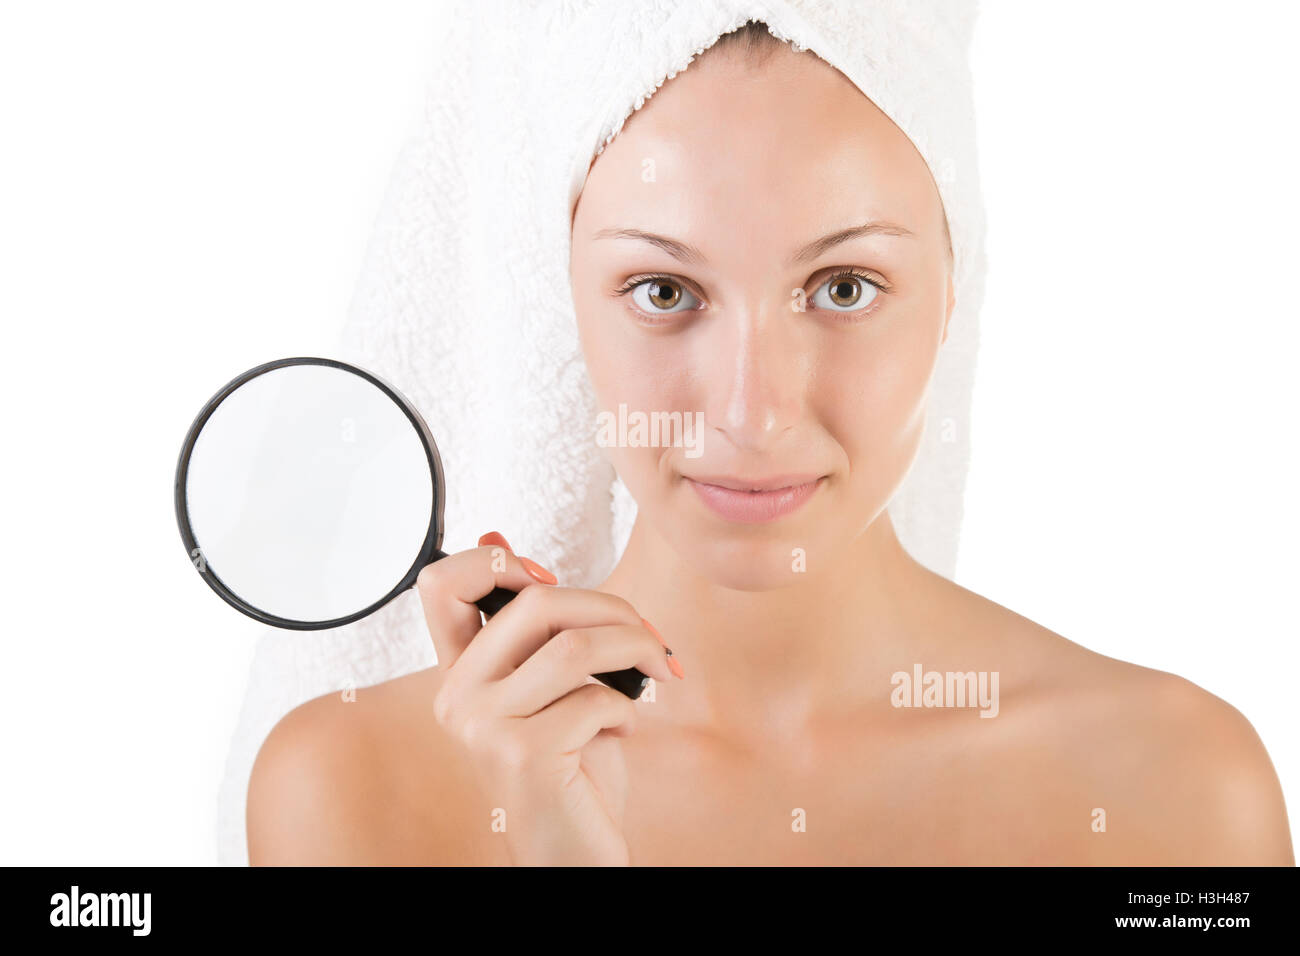 Woman with a towel wrapped around her head holding a loupe, isolated in white Stock Photo